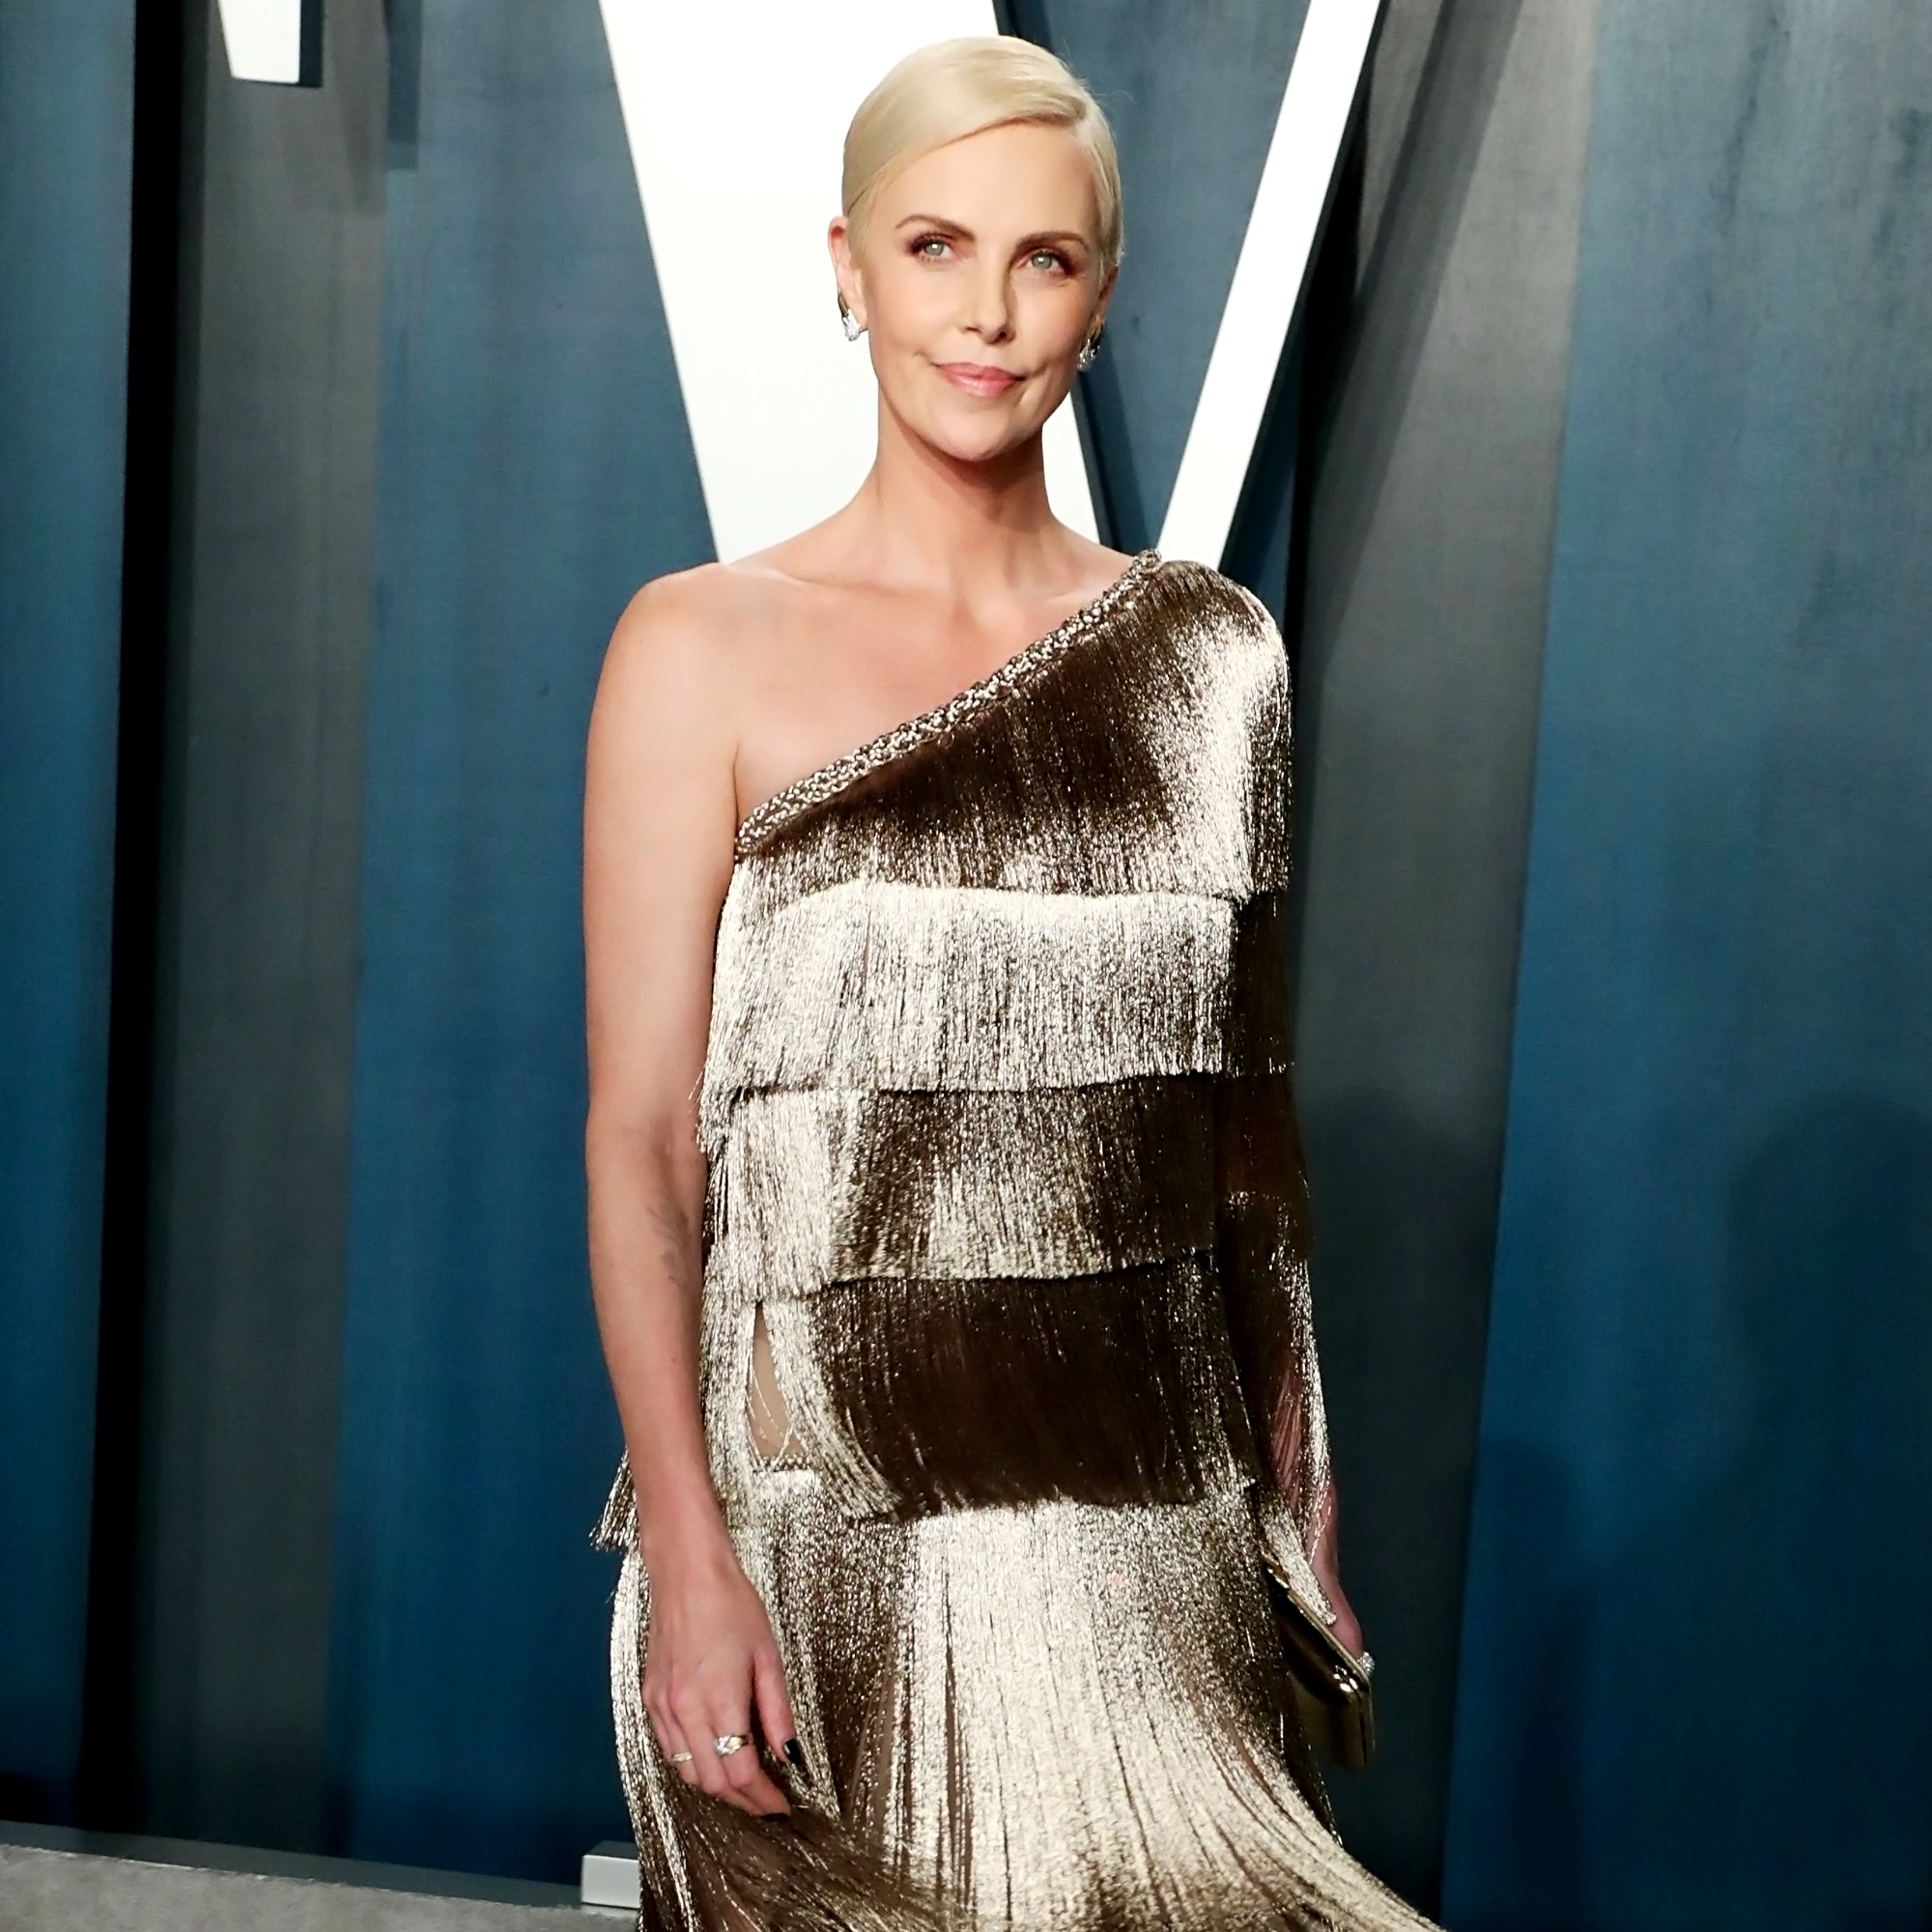 Charlize Theron - Charlize Theron's Most Empowering Quotes About Being Single